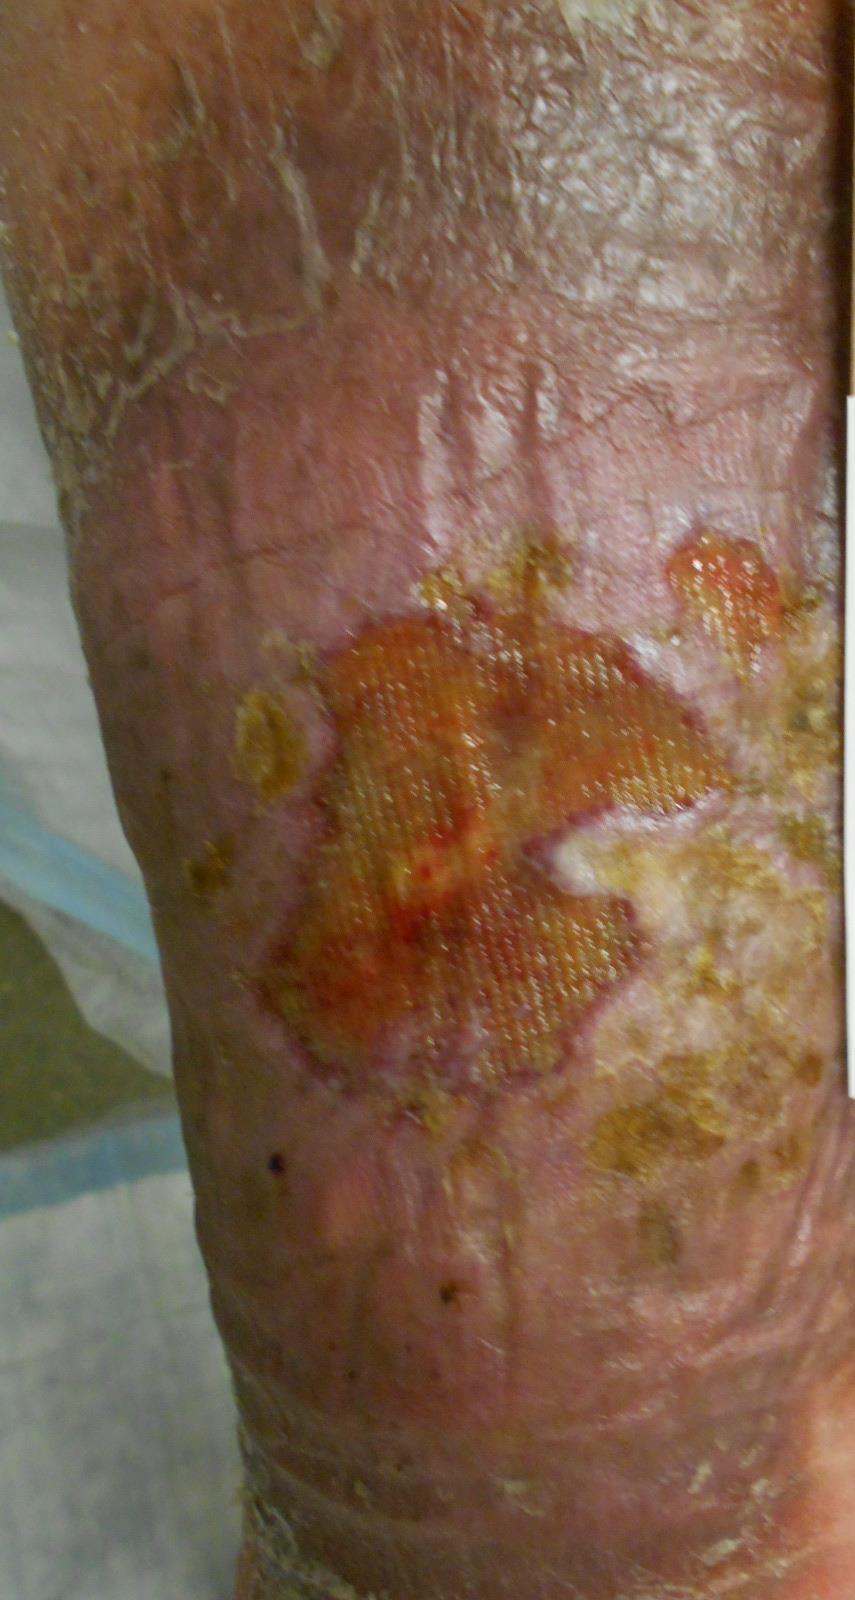 Chronic nonhealing leg ulcer 52 YO male w h/o multiple DVTs starting 11 yrs before initial visit in